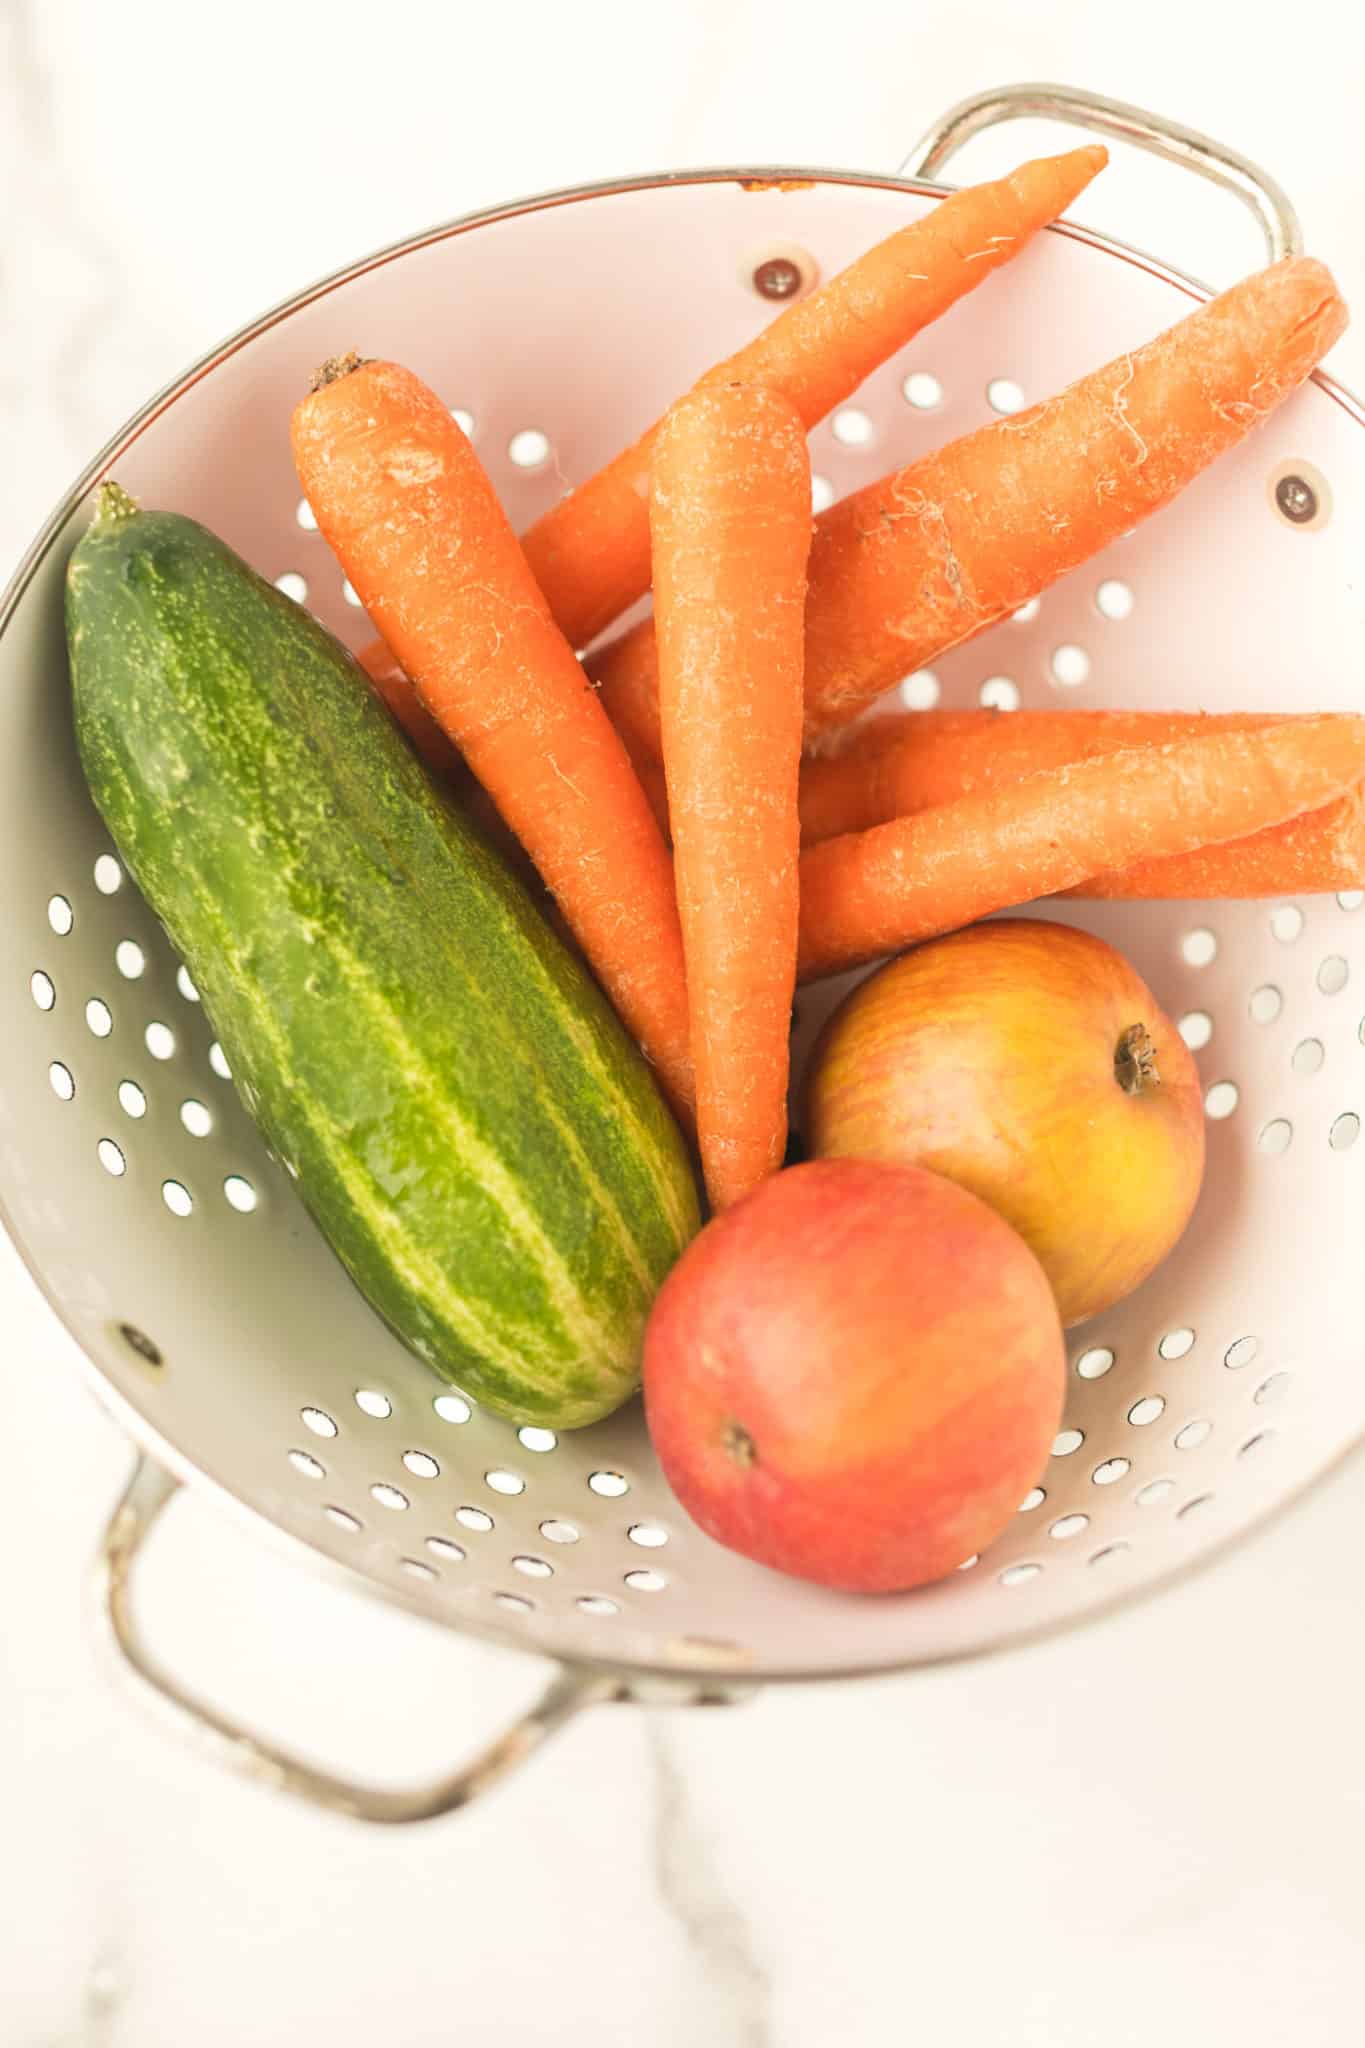 carrots, cucumber, and apple